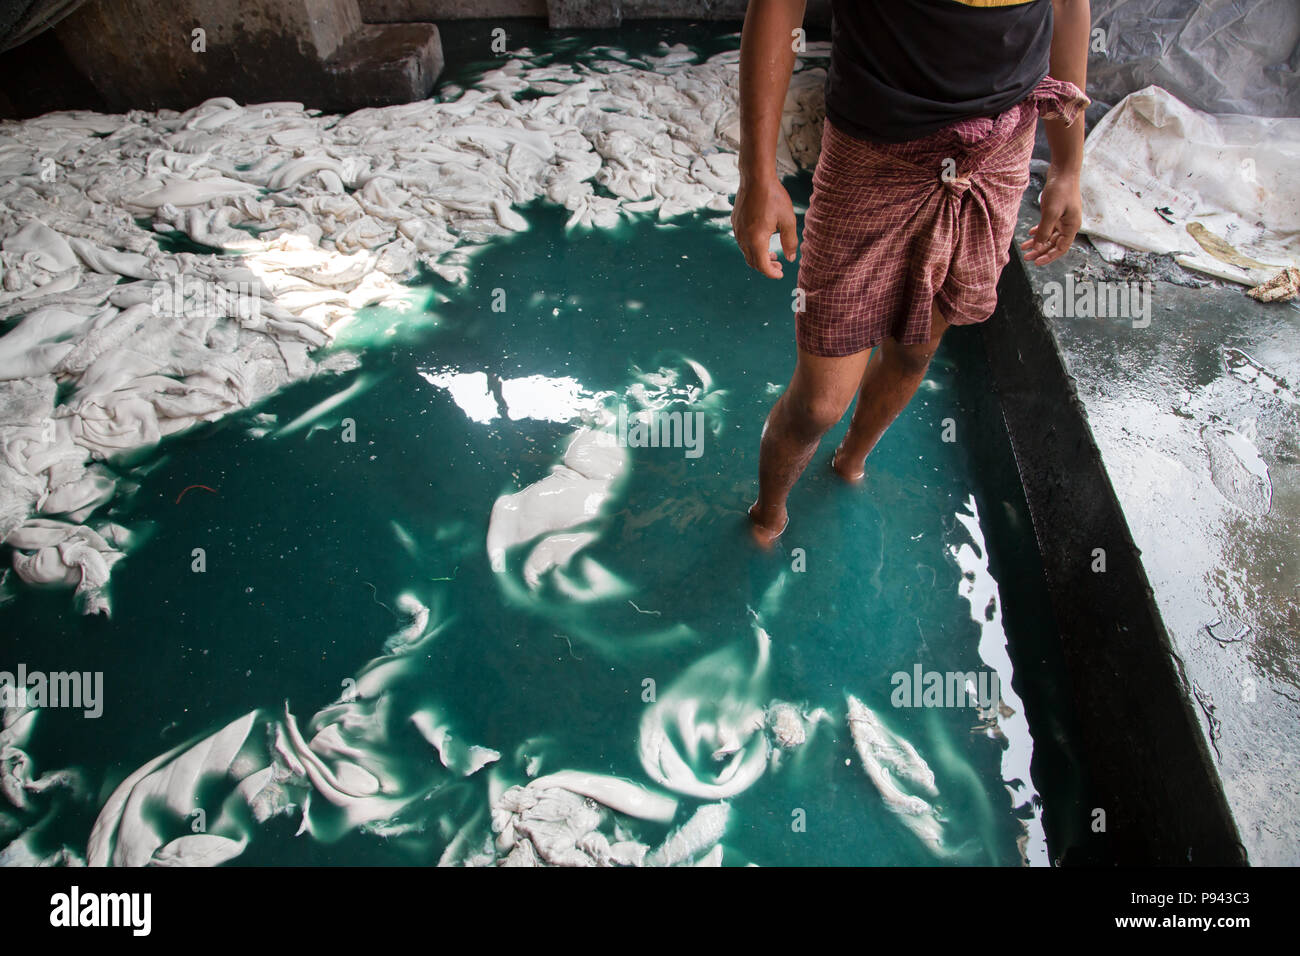 Worker in polluted water basin in Hazaribagh tannery Dhaka, Bangladesh Stock Photo